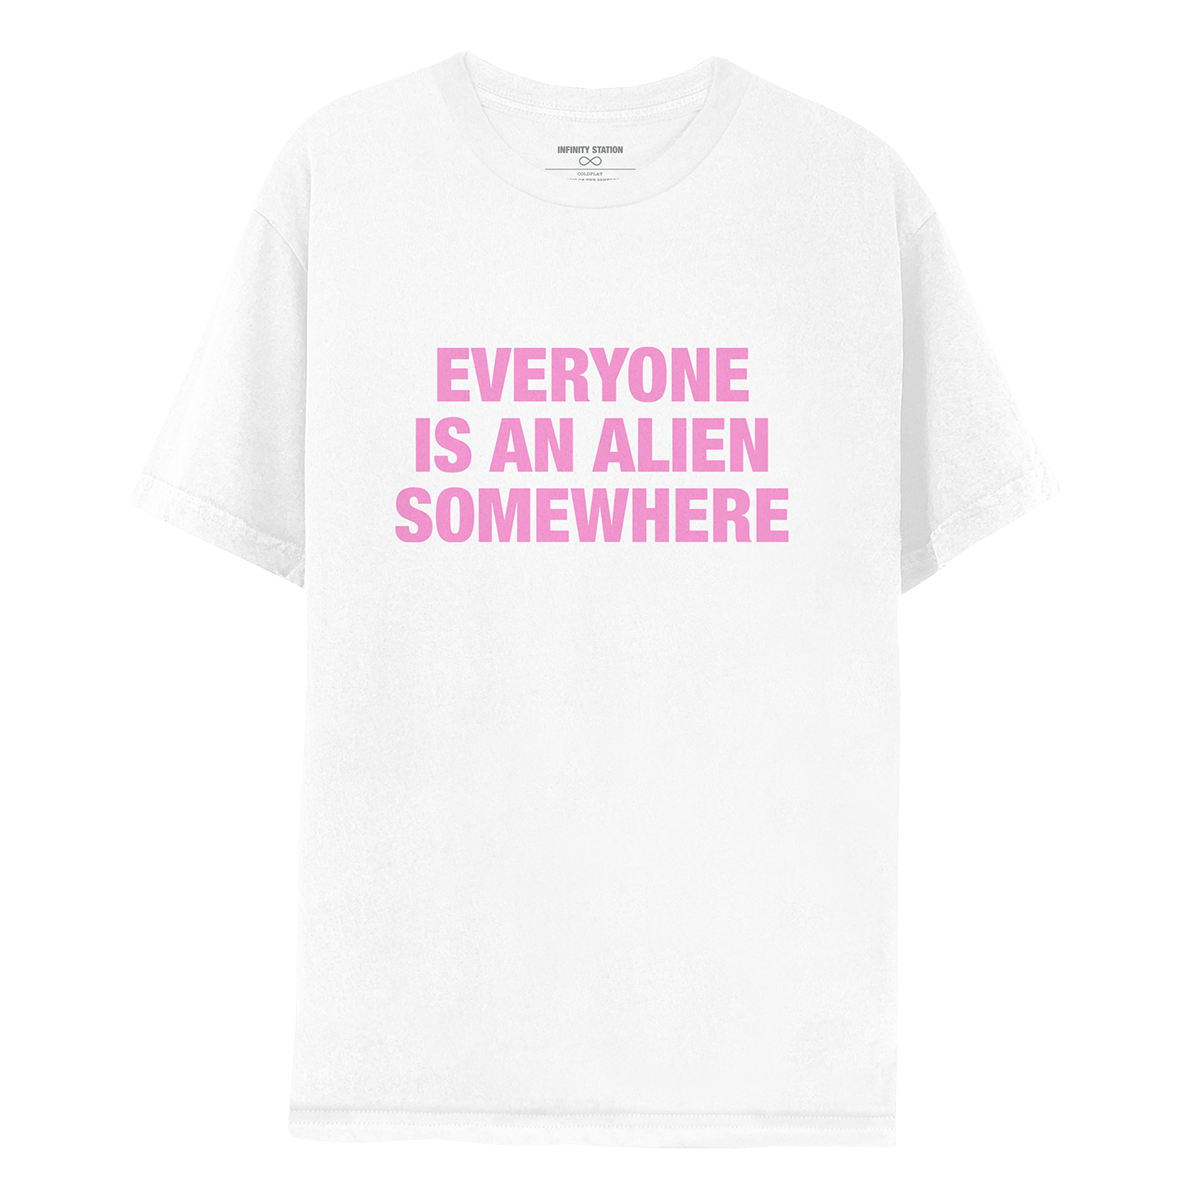 Everyone Is An Alien Somewhere Tee - White